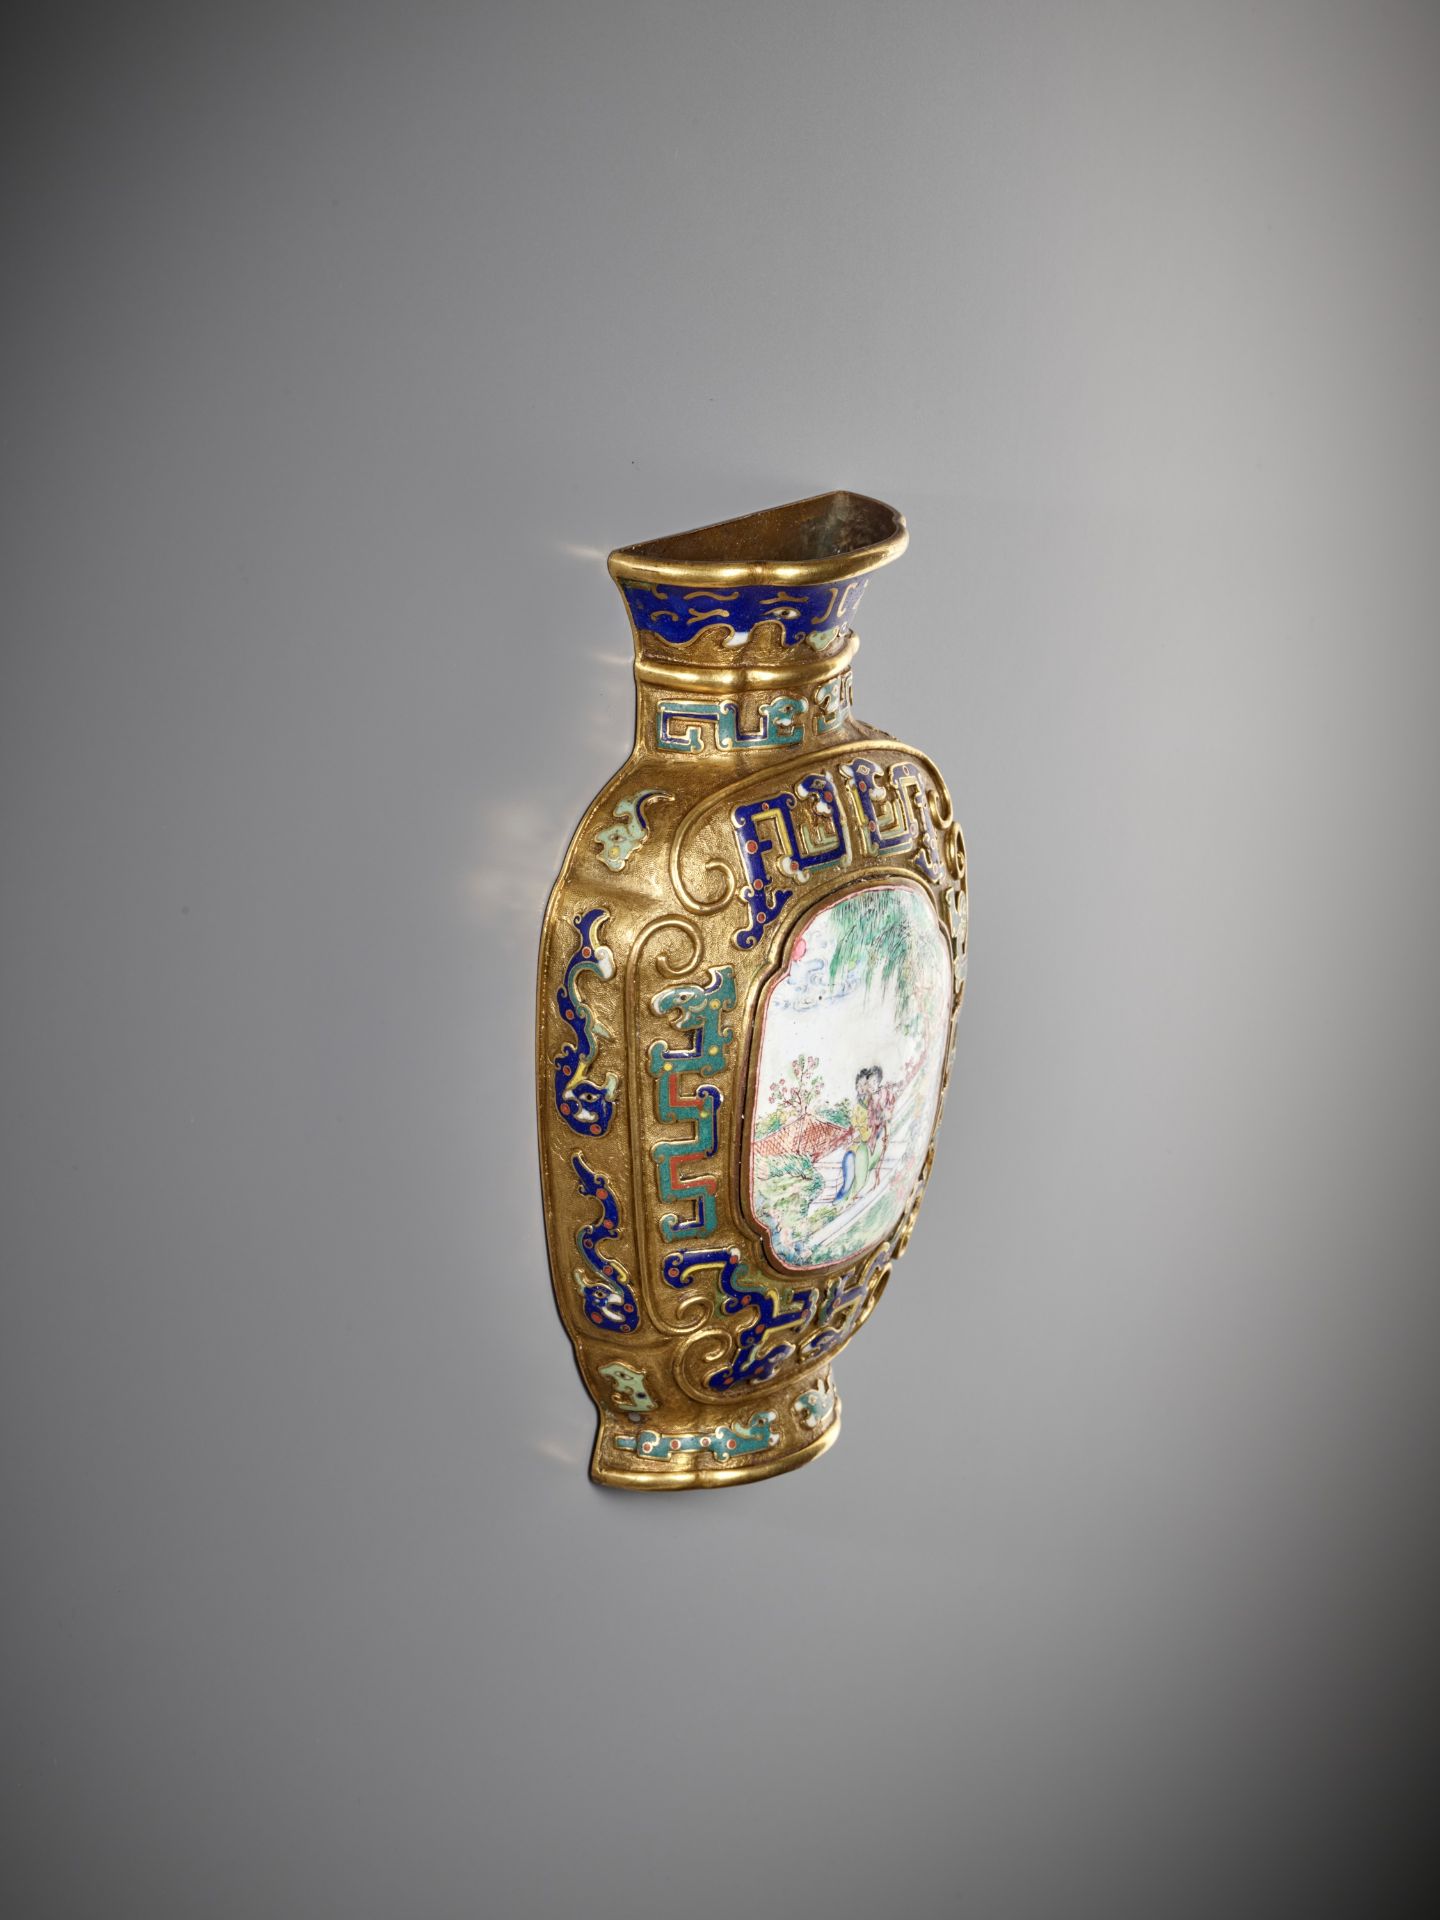 A CHAMPLEVE AND ENAMEL WALL VASE, GUANGDONG TRIBUTE TO THE IMPERIAL COURT, QIANLONG - Image 6 of 10